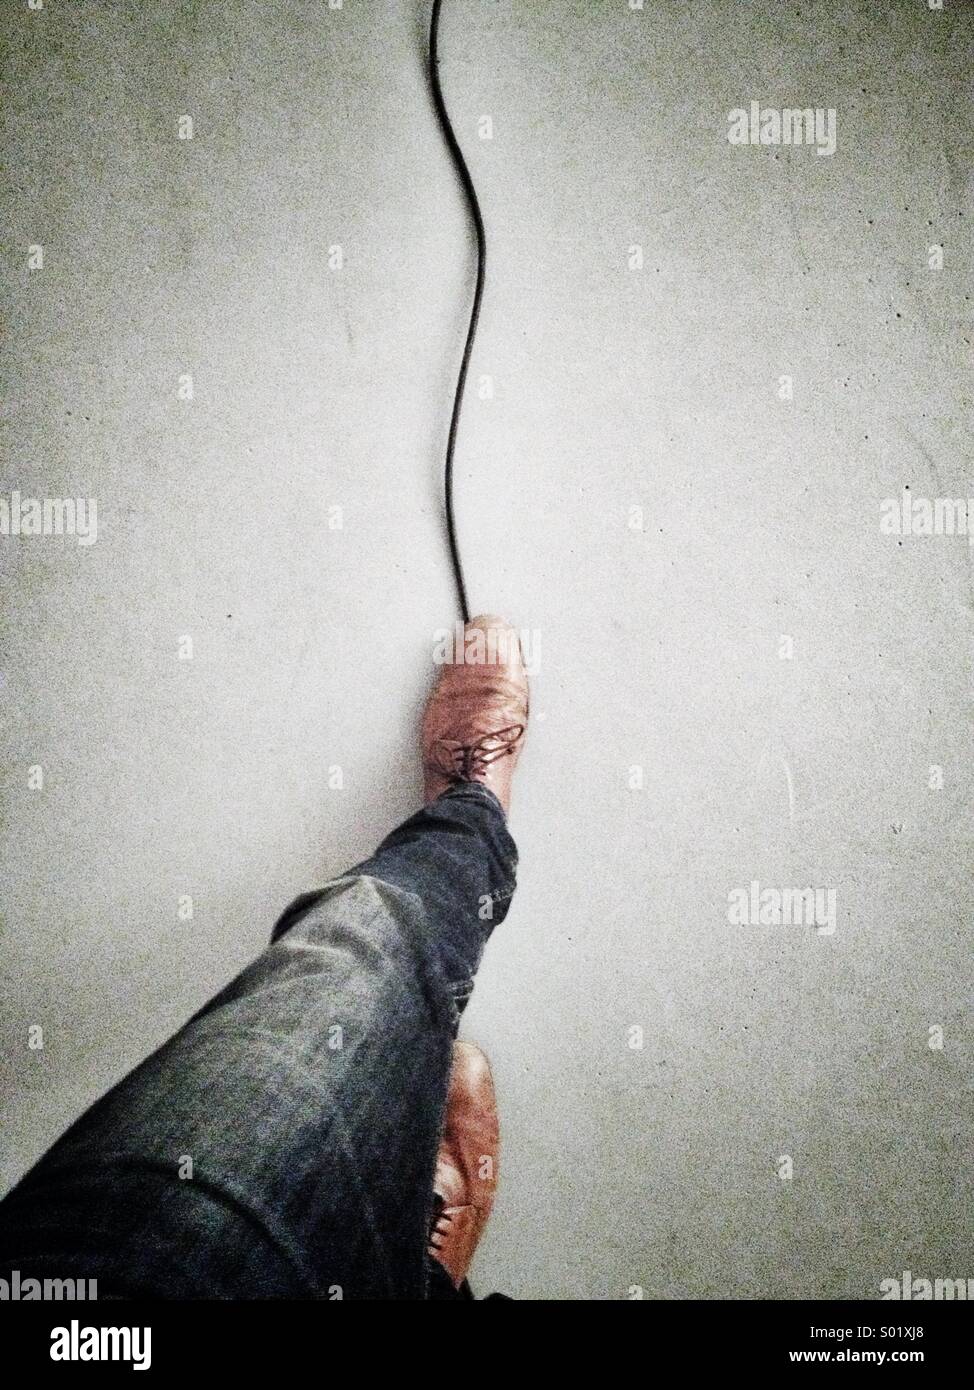 Balancing on cable Stock Photo